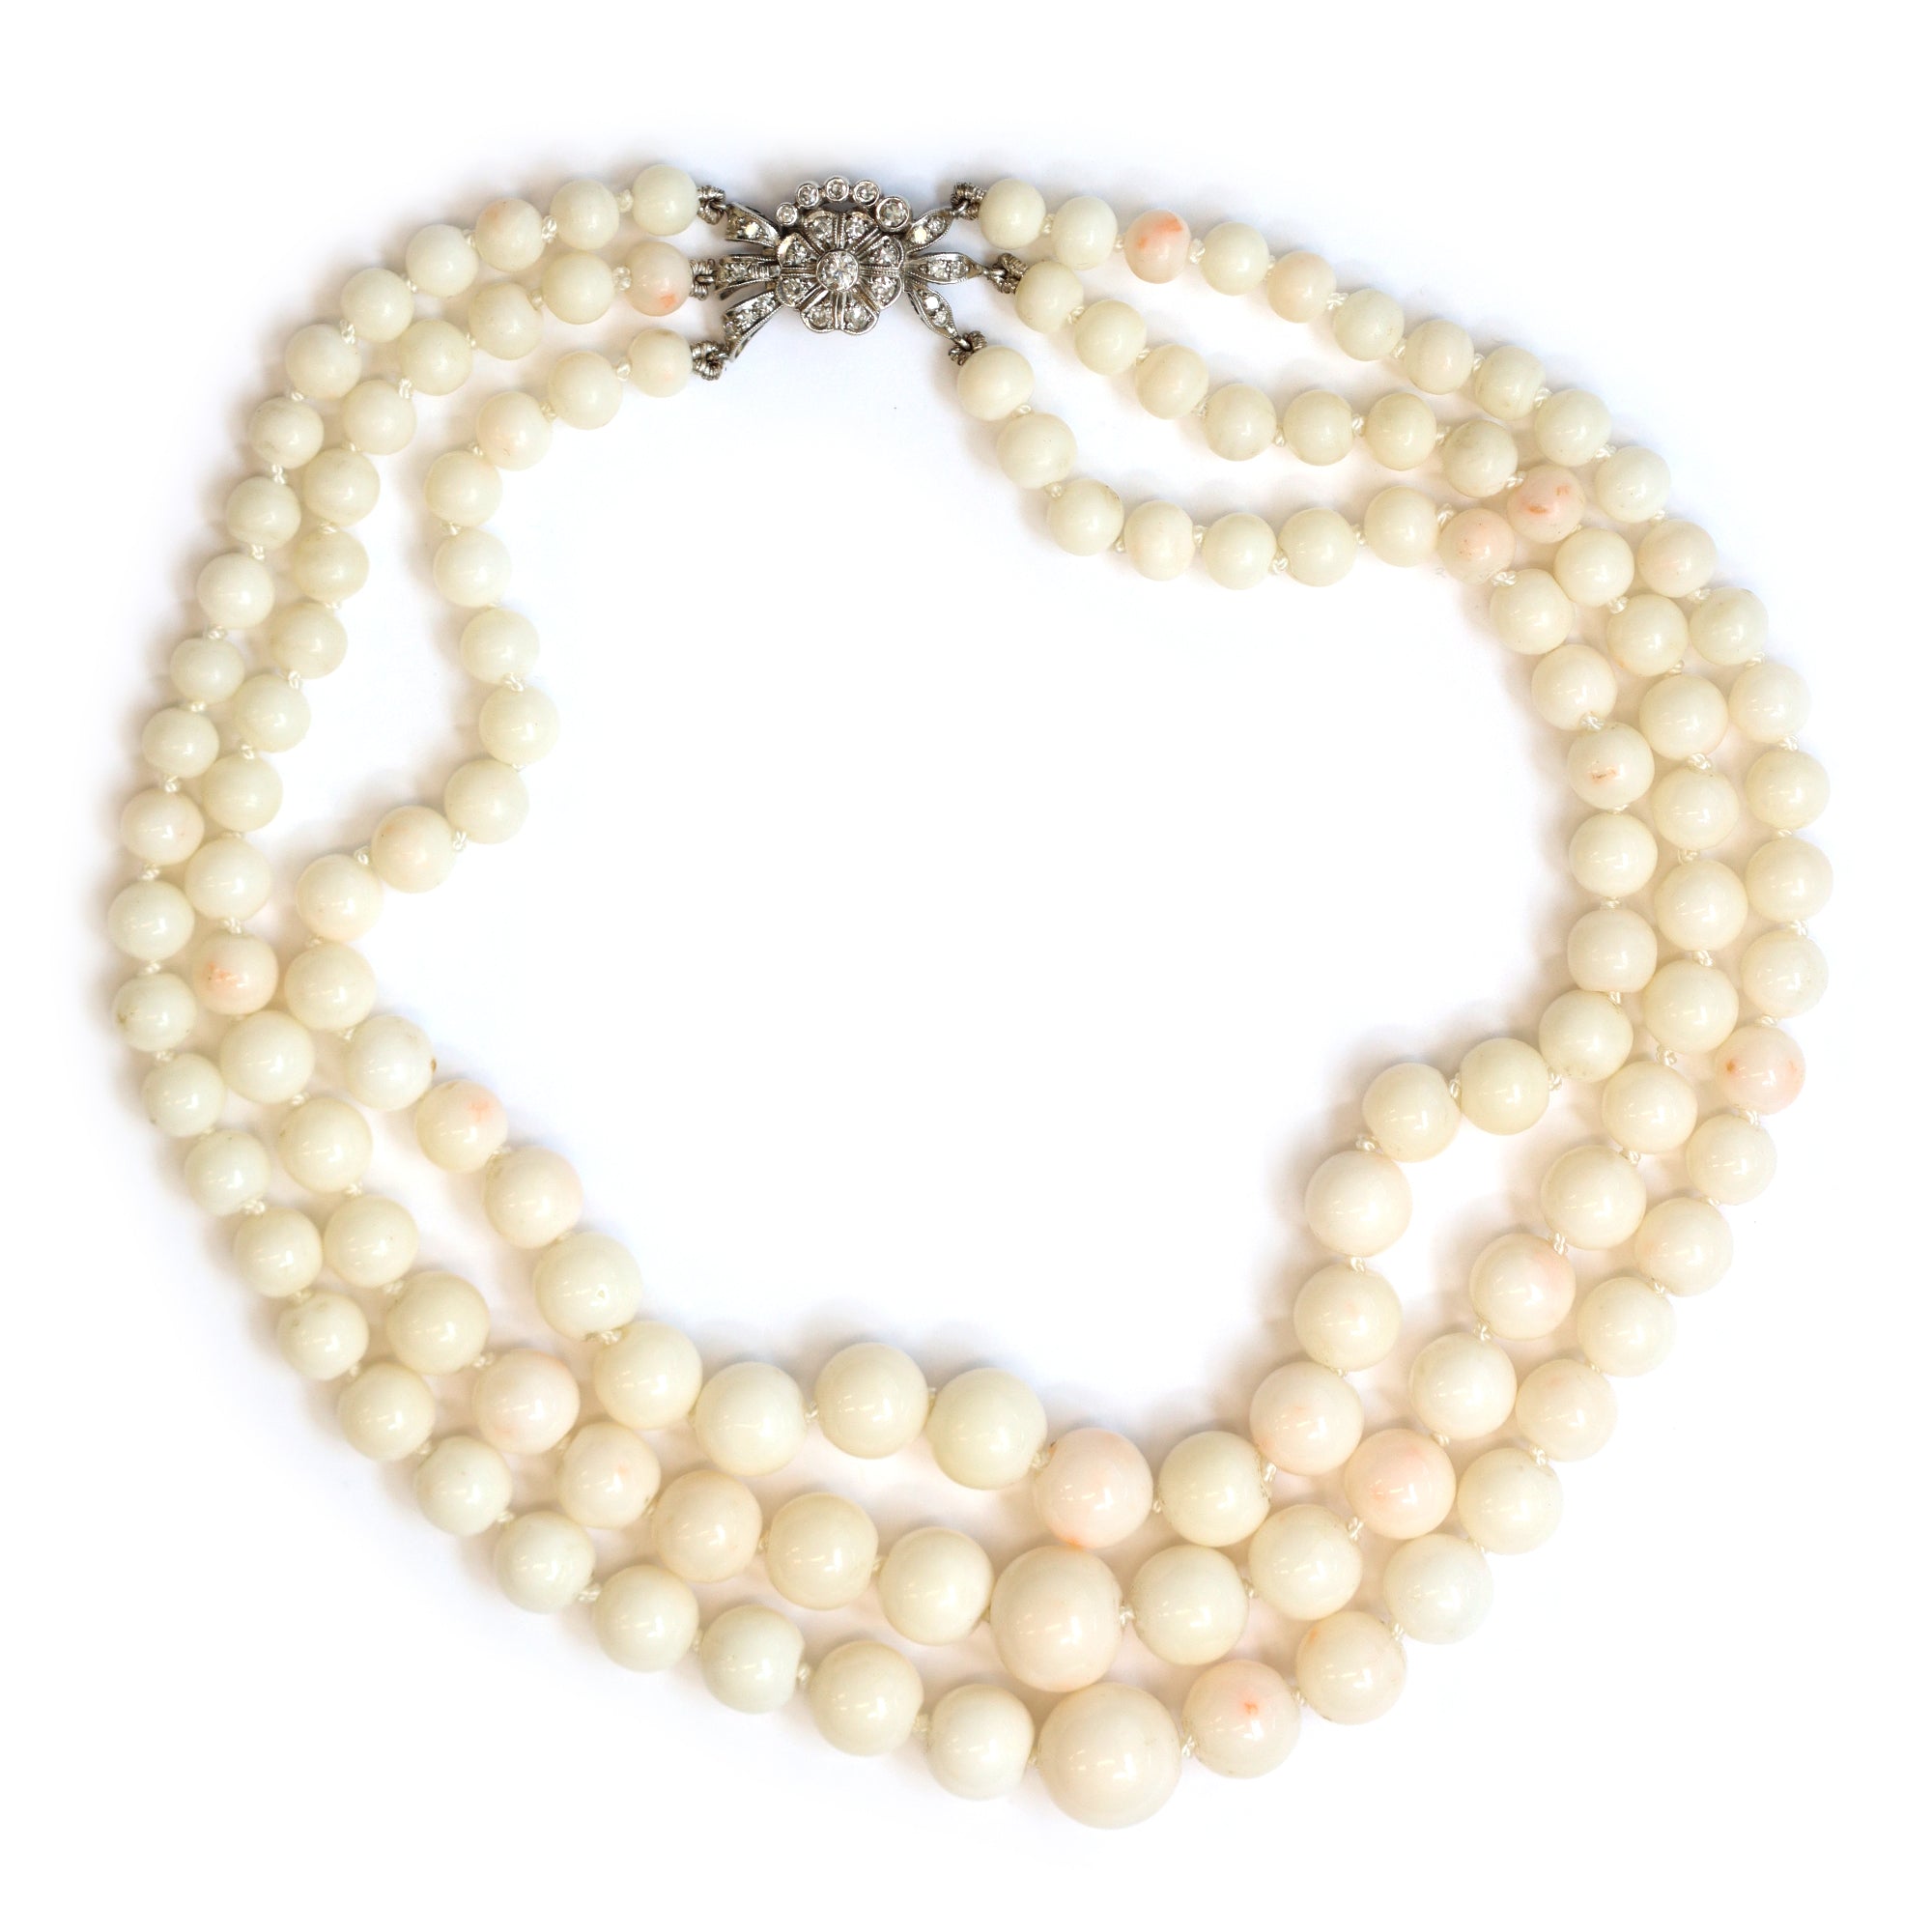 Mid-Century Double-Strand Coral Necklace